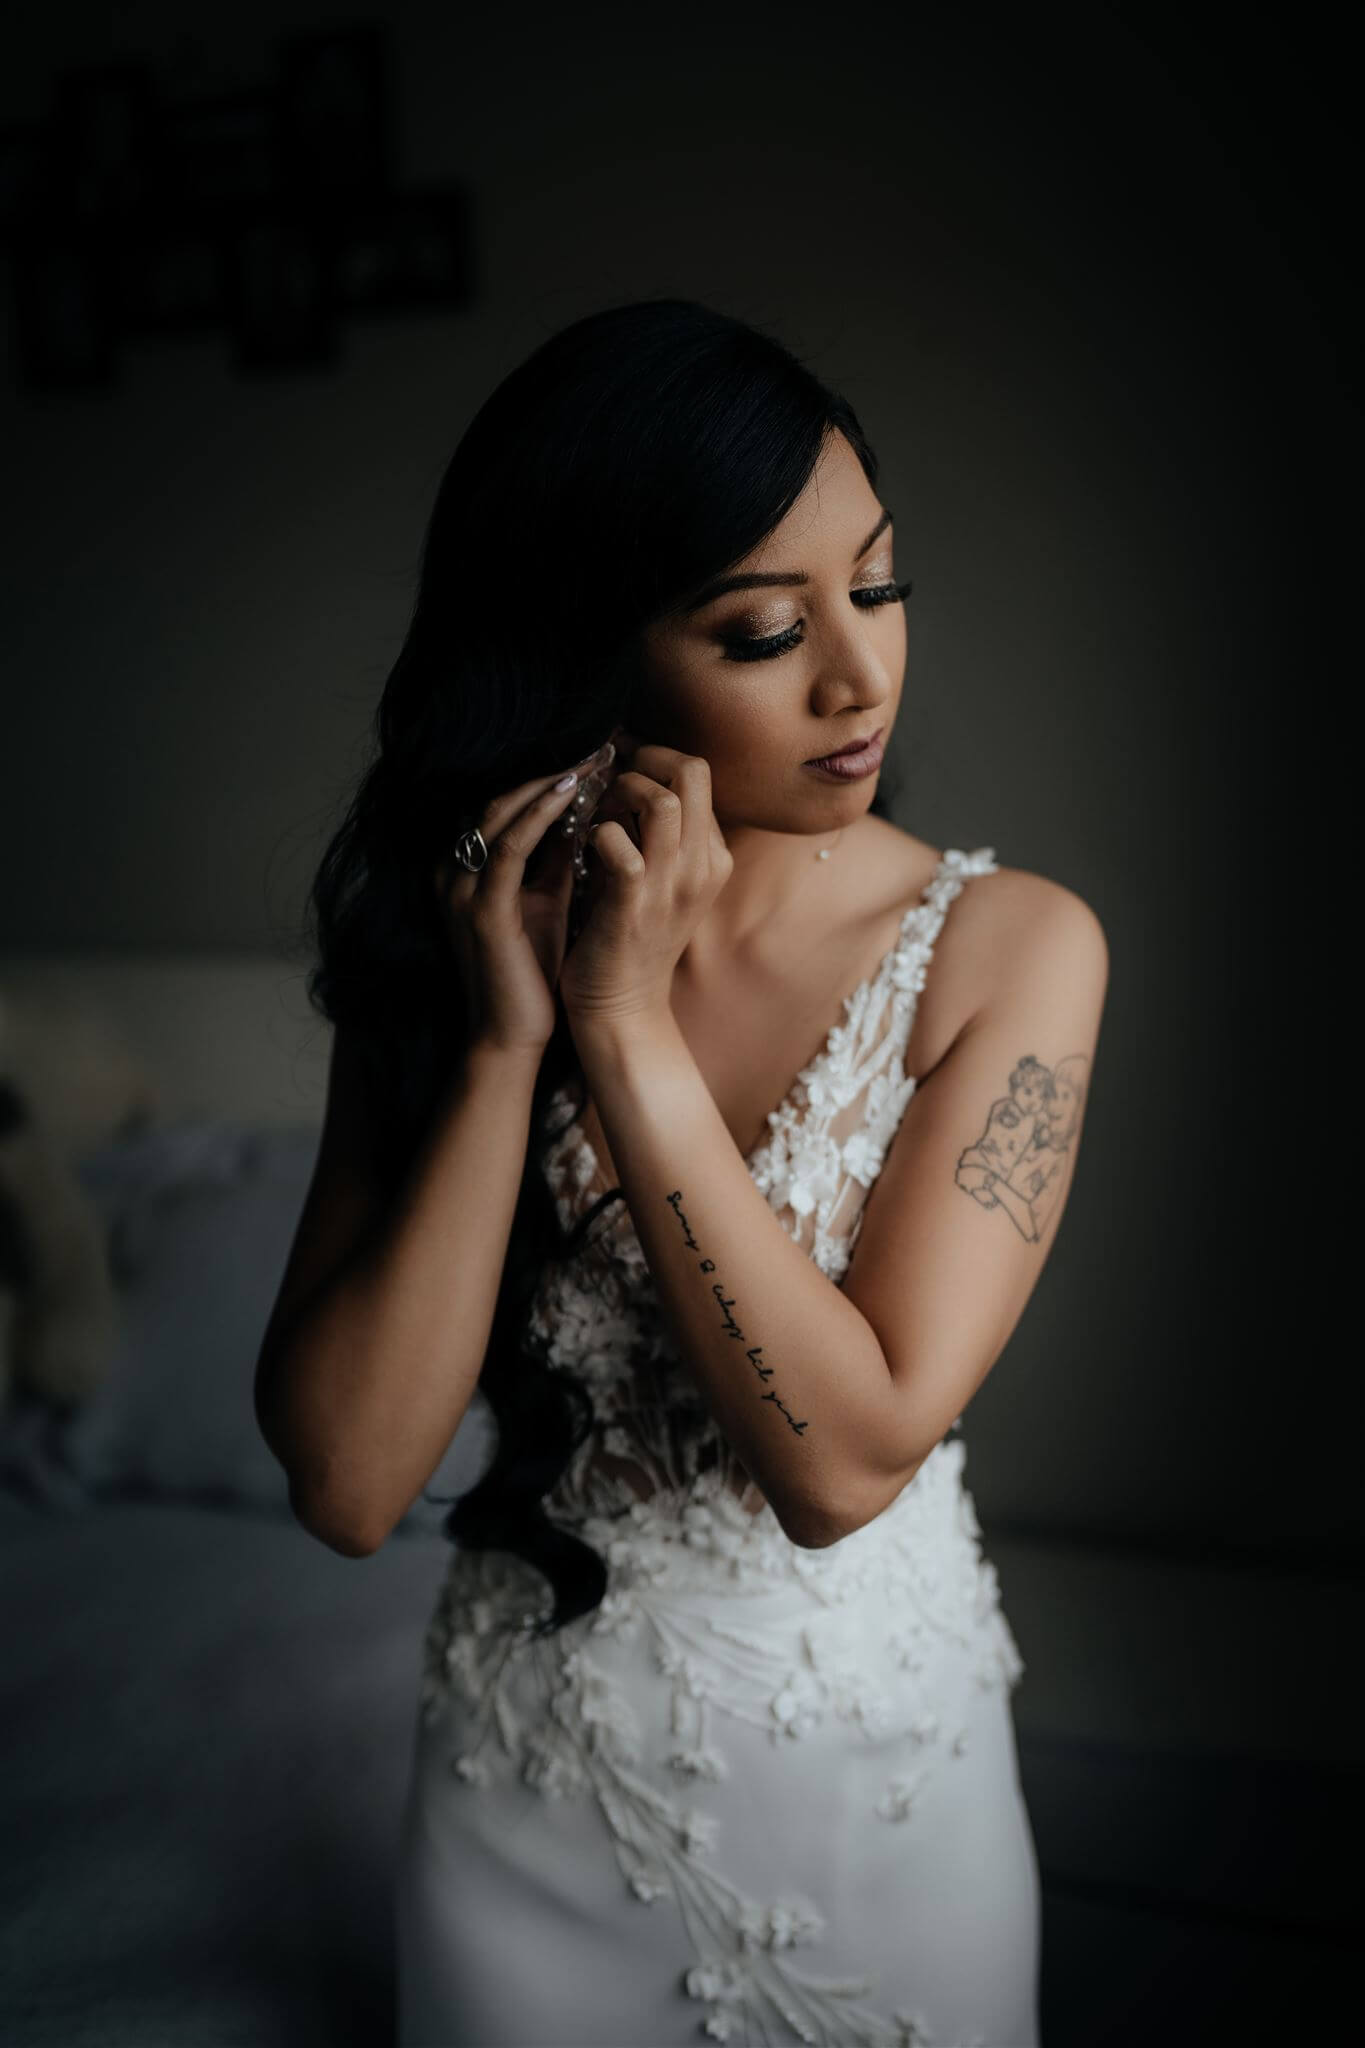 Vinka Design Real Wedding with Vinka Bride Prianka in full length wedding dress - bride poses showing detail of dress with stunning lace underlayer with beautiful detail - putting on earrings